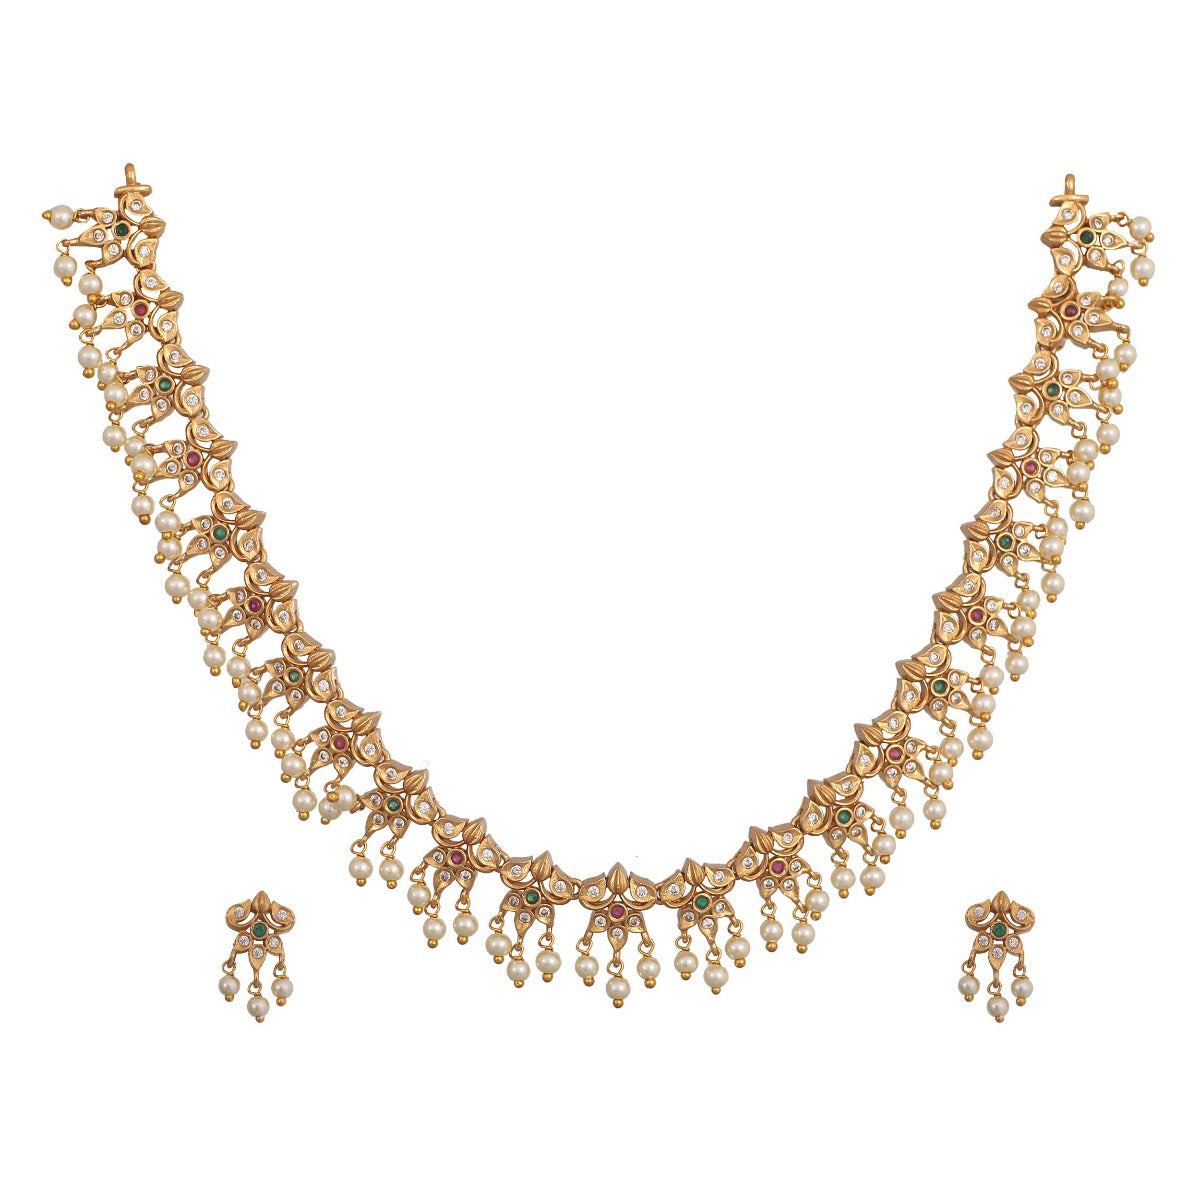 Antique Gold Plated Bakul Necklace Earring Set 